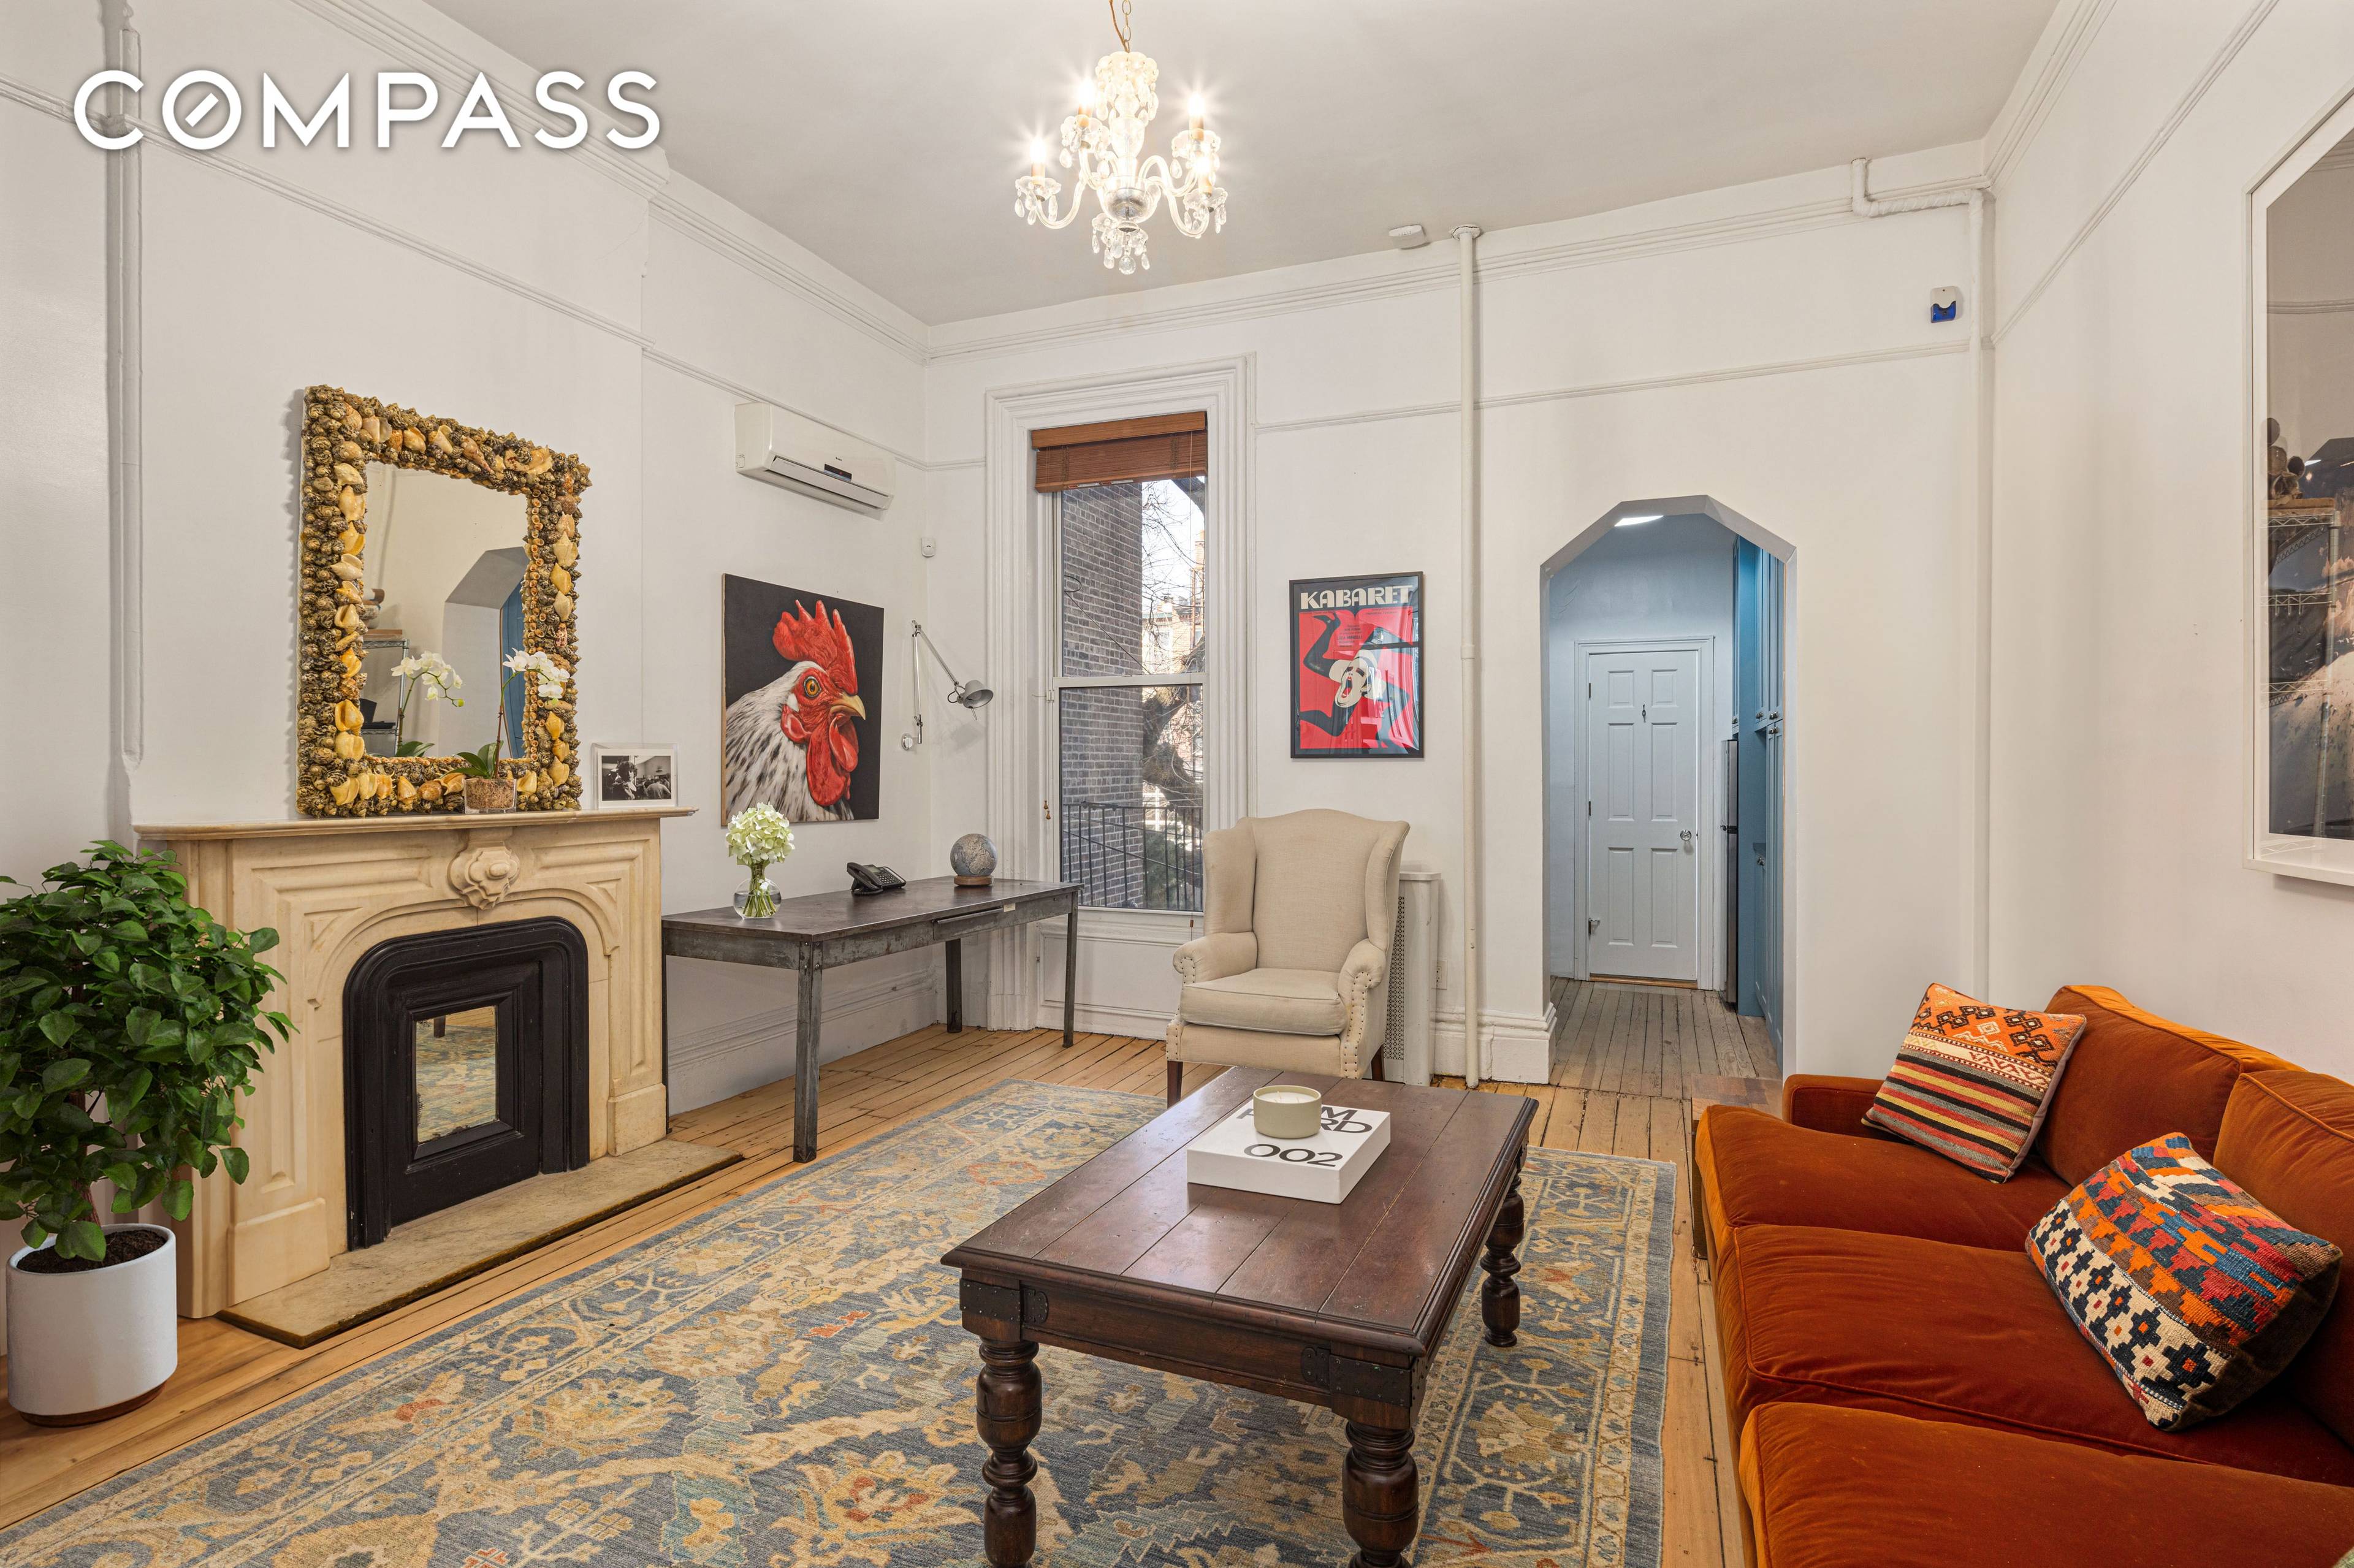 Welcome to 20 Strong Place, a charming circa 1900, 5 story brownstone with high ceilings, terrific light, original detail, a deep west facing garden and a terrace with western views ...